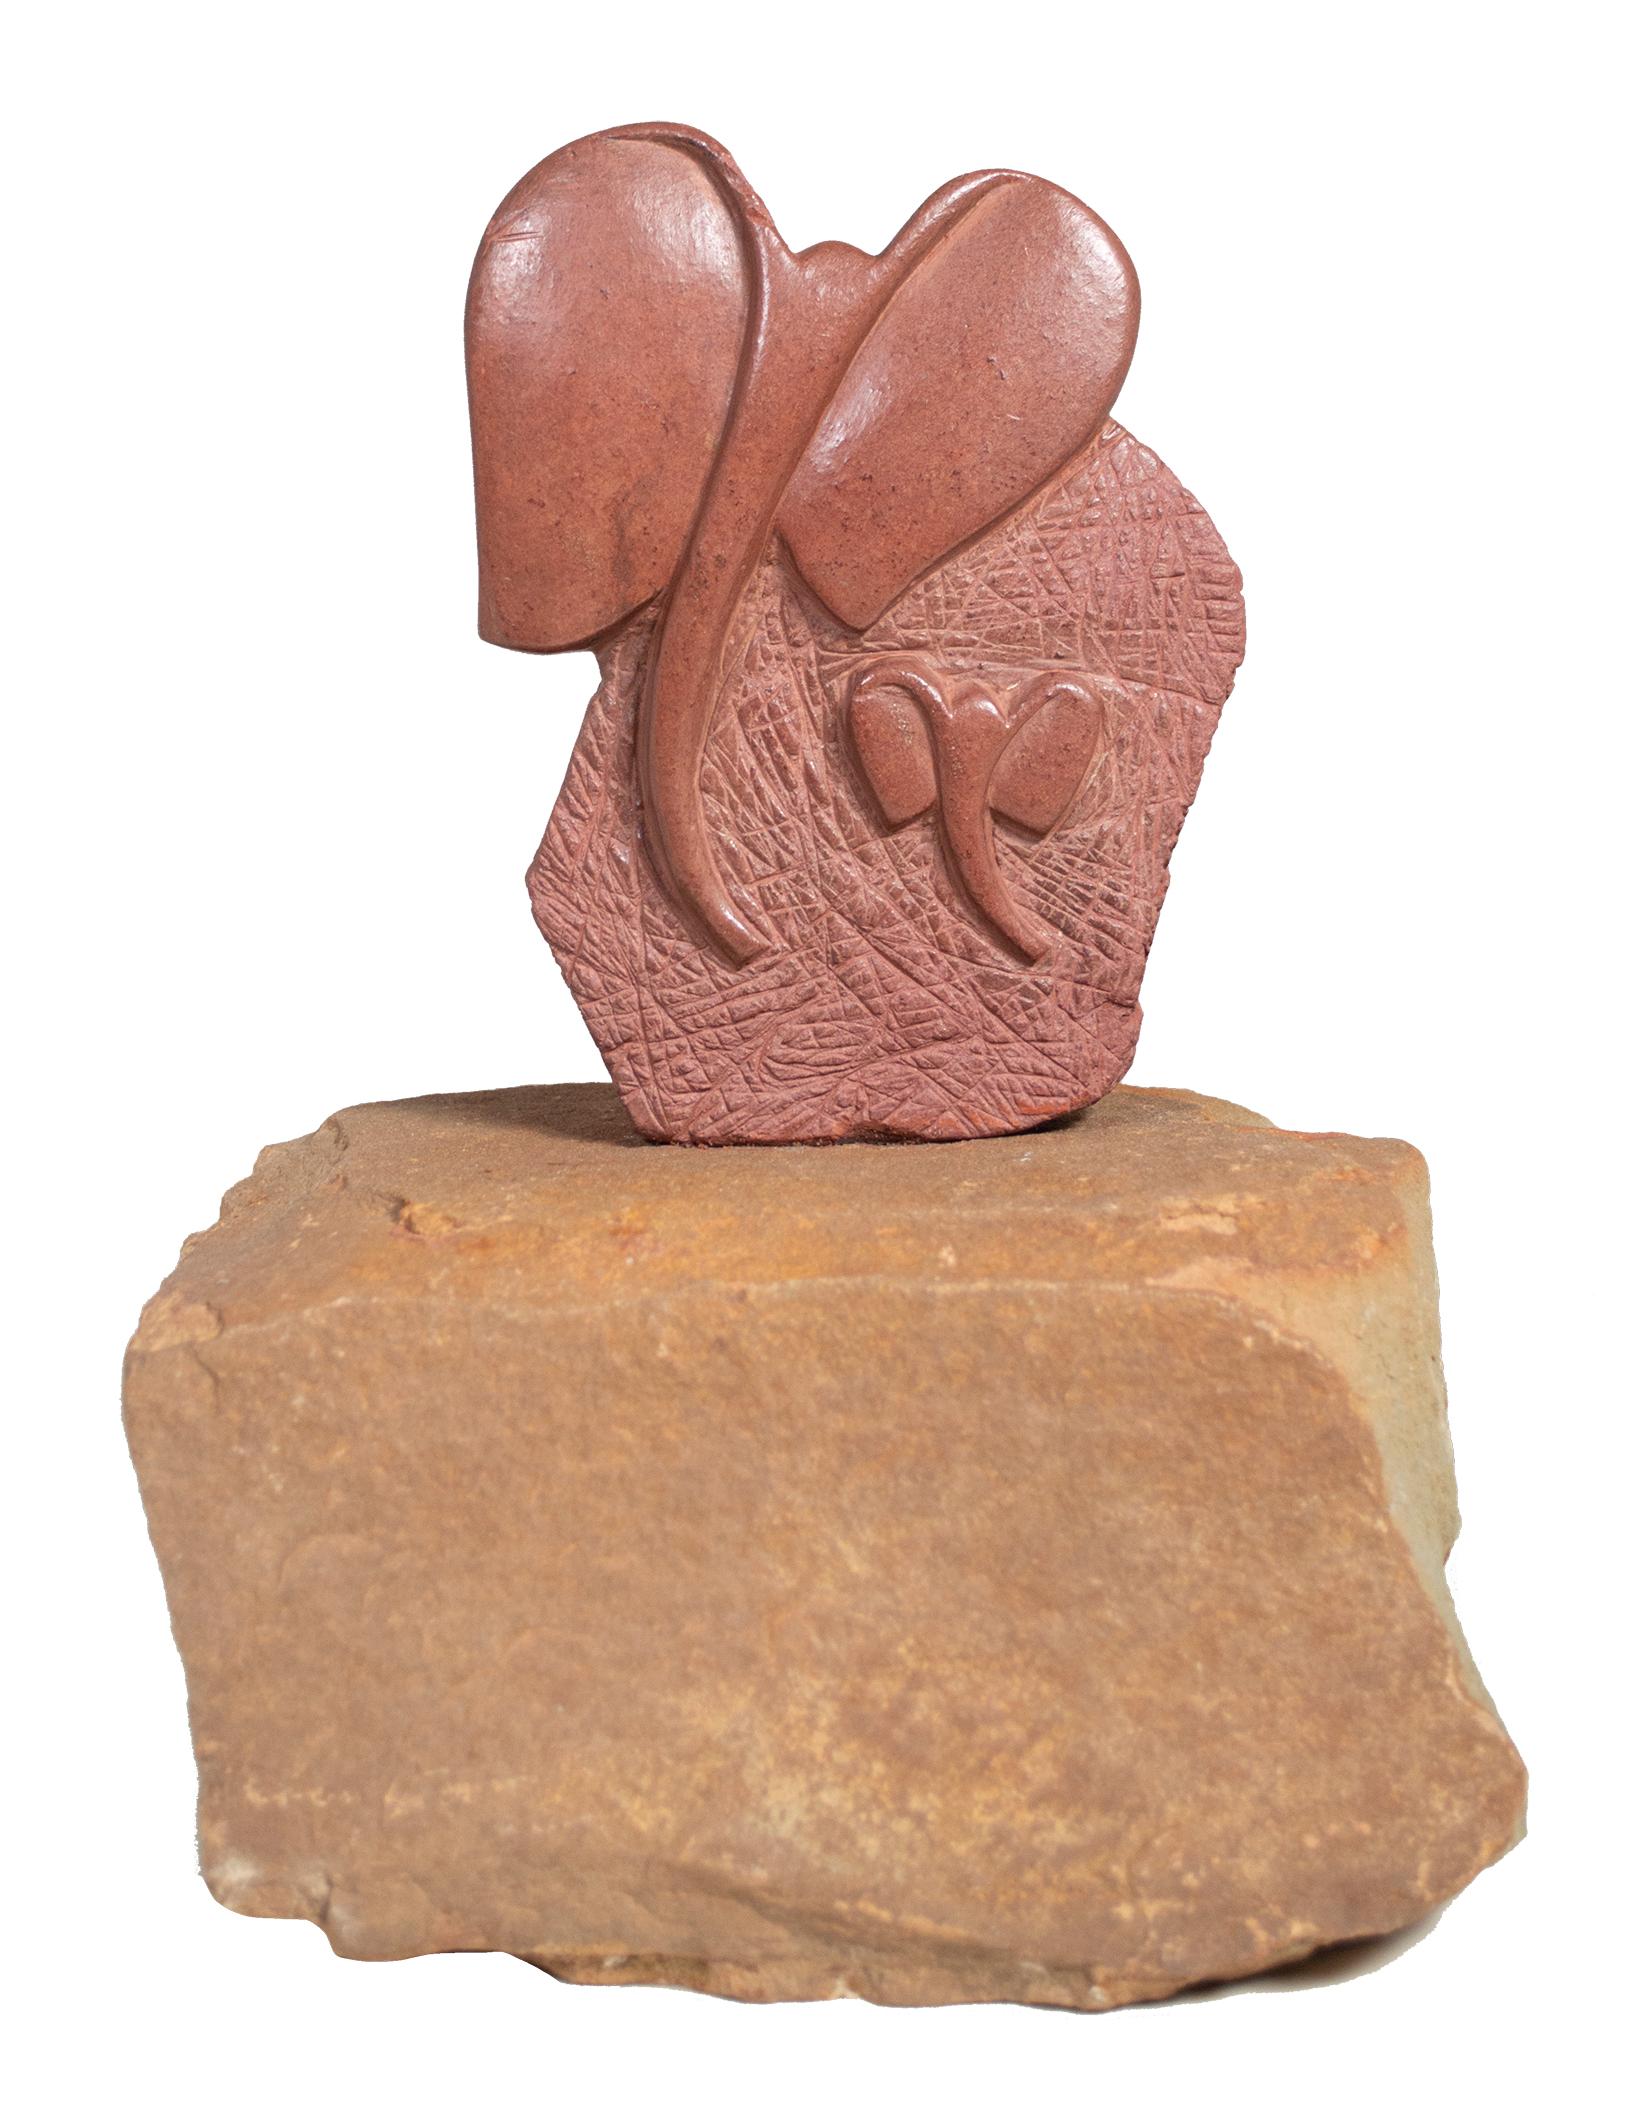 Unknown Figurative Sculpture - 'Mother Elephant with Baby' original small sculpture, heirloom gift